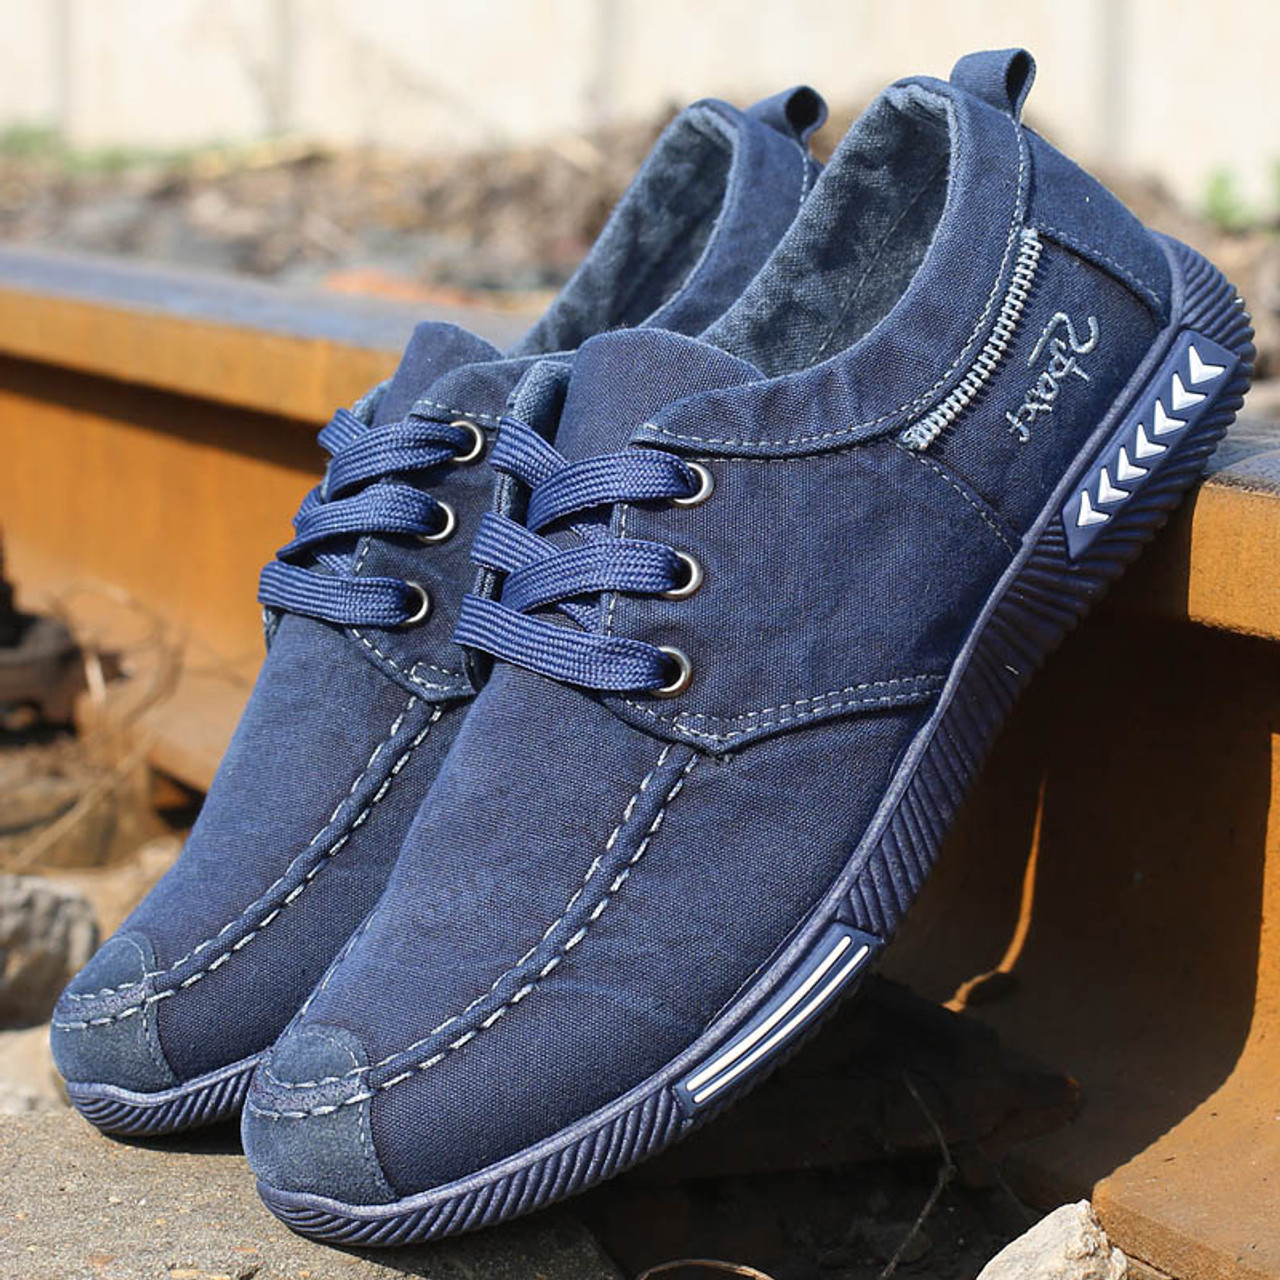 men's casual shoes with jeans 218